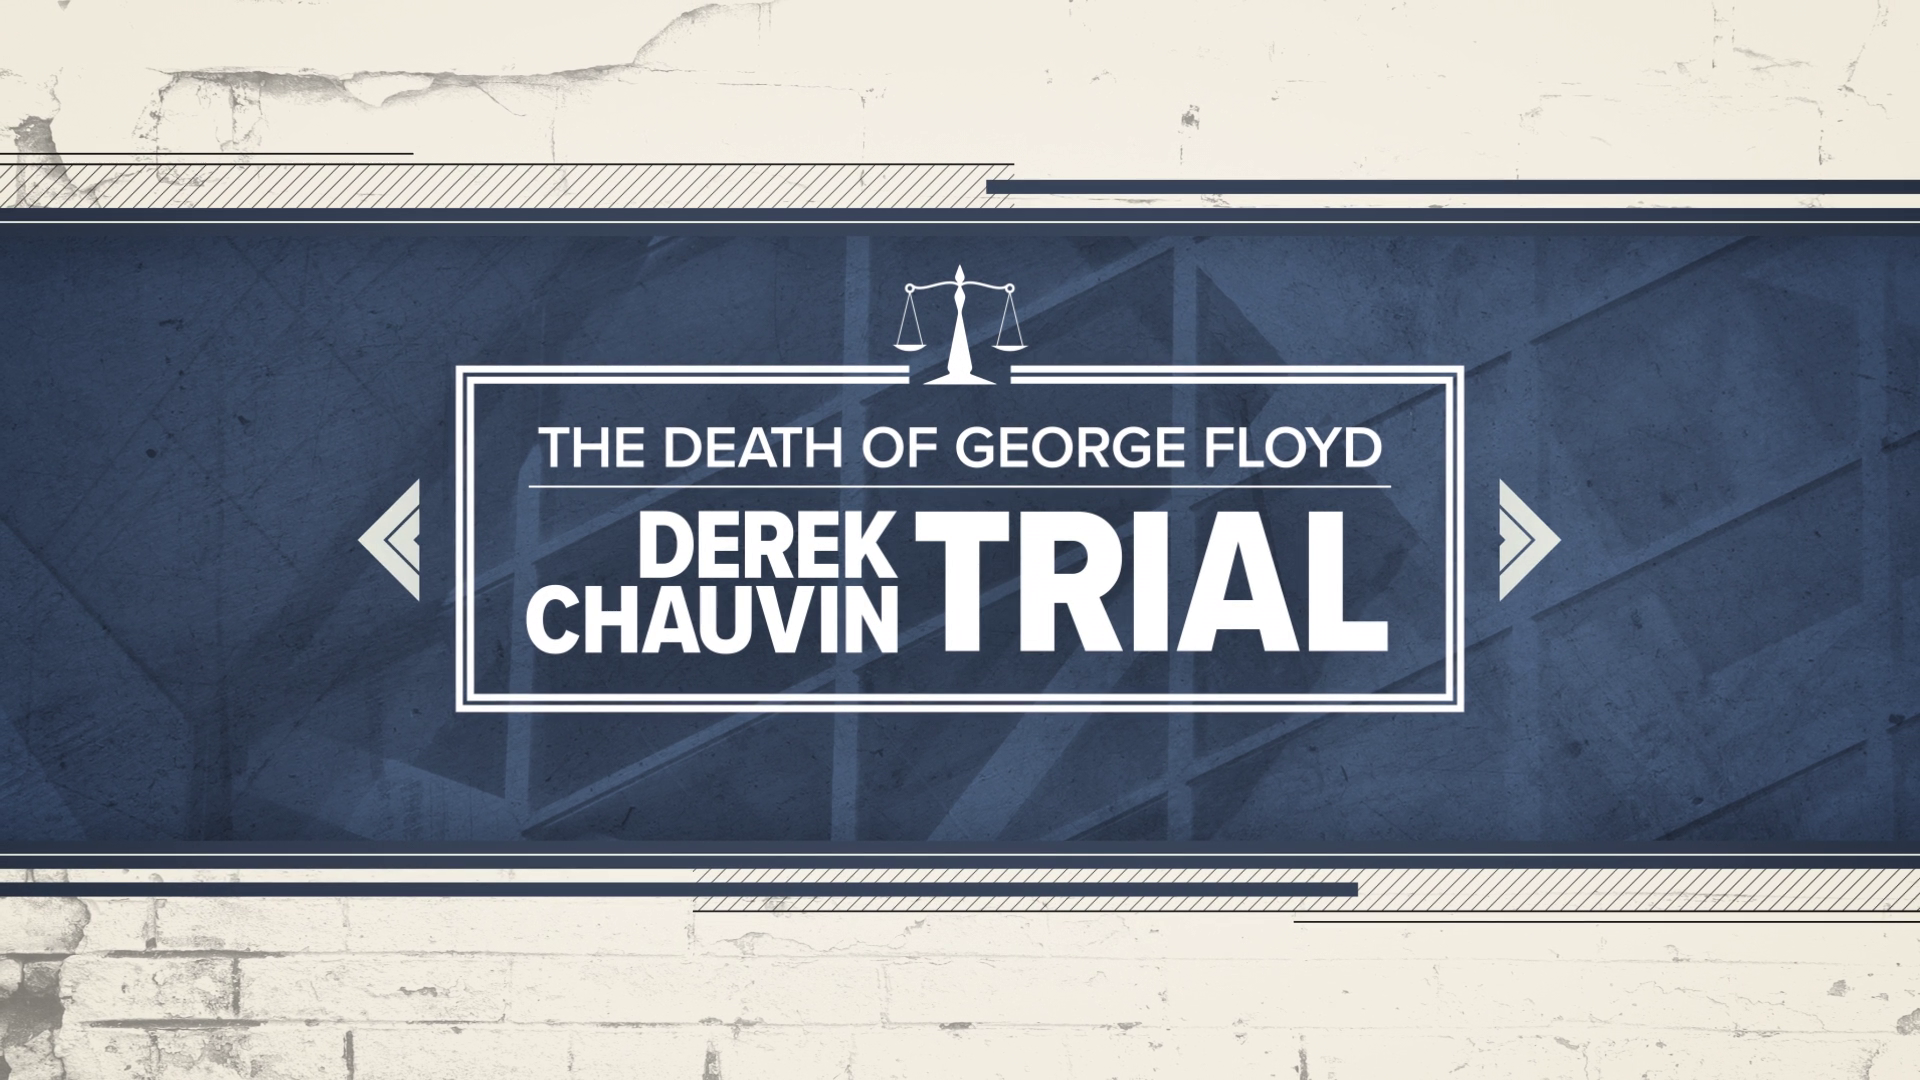 After unusually lengthy closing arguments from the prosecution and defense, the question of Chauvin's guilt in George Floyd's death is now in the hands of the jury.